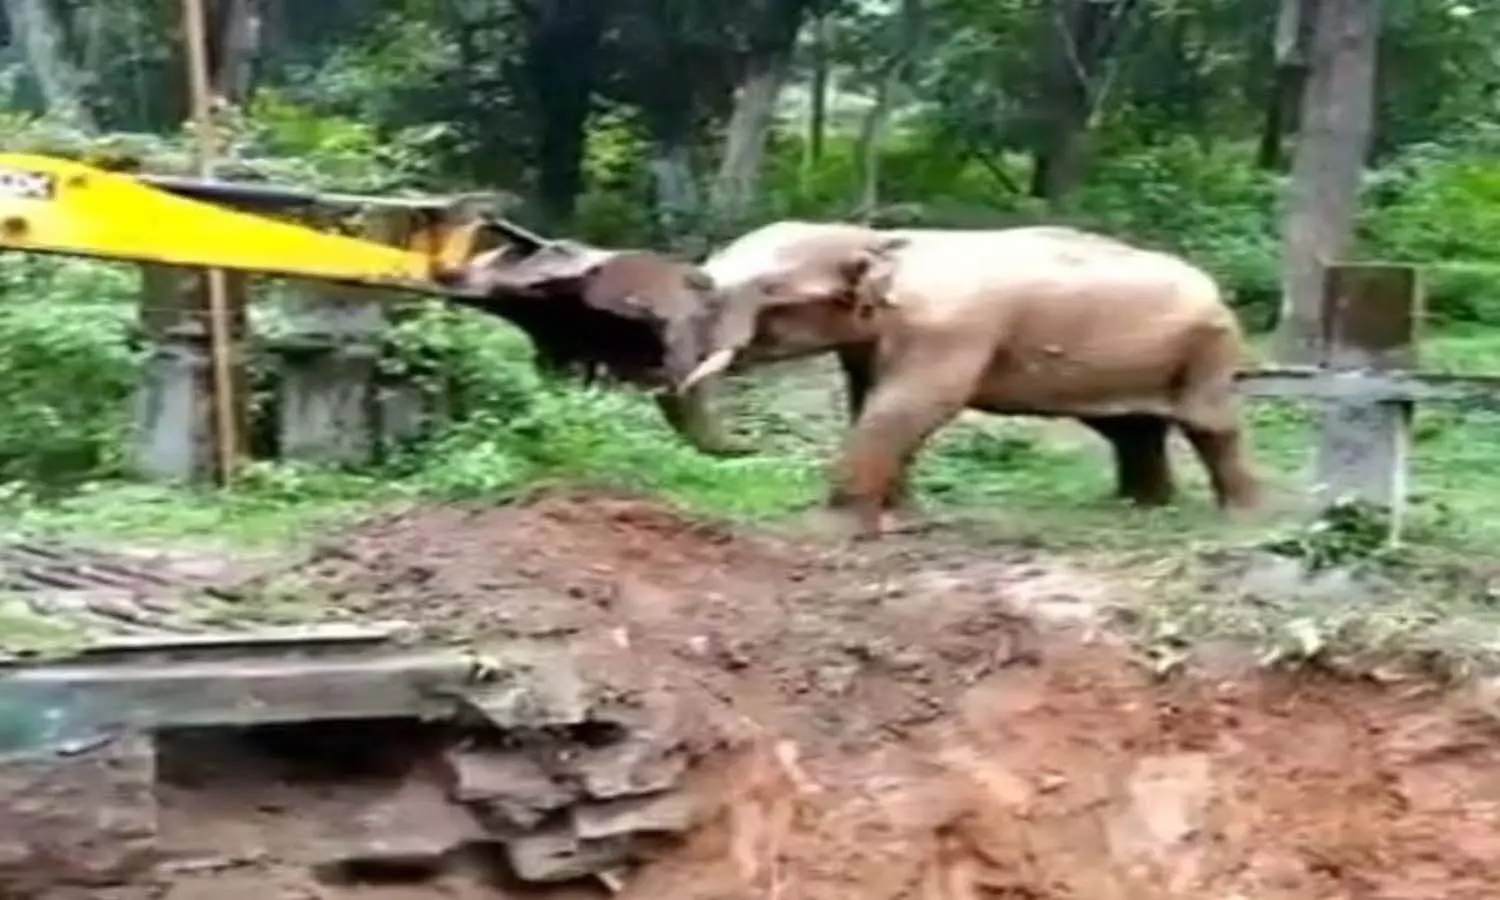 Its Viral! Bulldozer lifts elephant out of the pit; how innocently elephant thanks will melt your heart